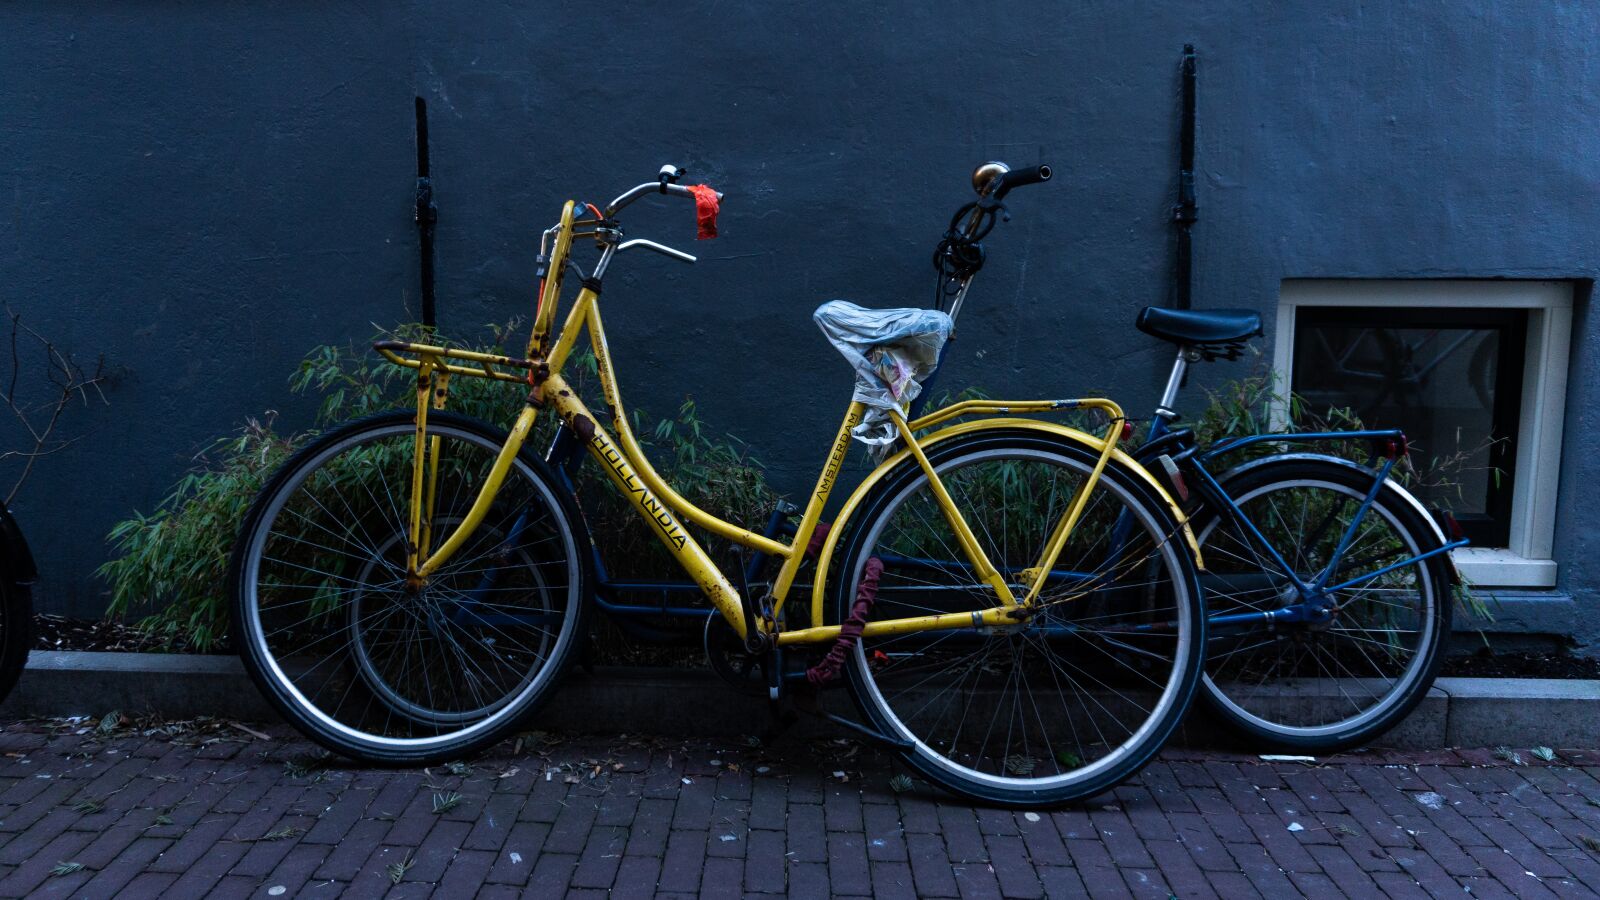 Sony a6300 sample photo. Bicycle, amsterdam, netherlands photography